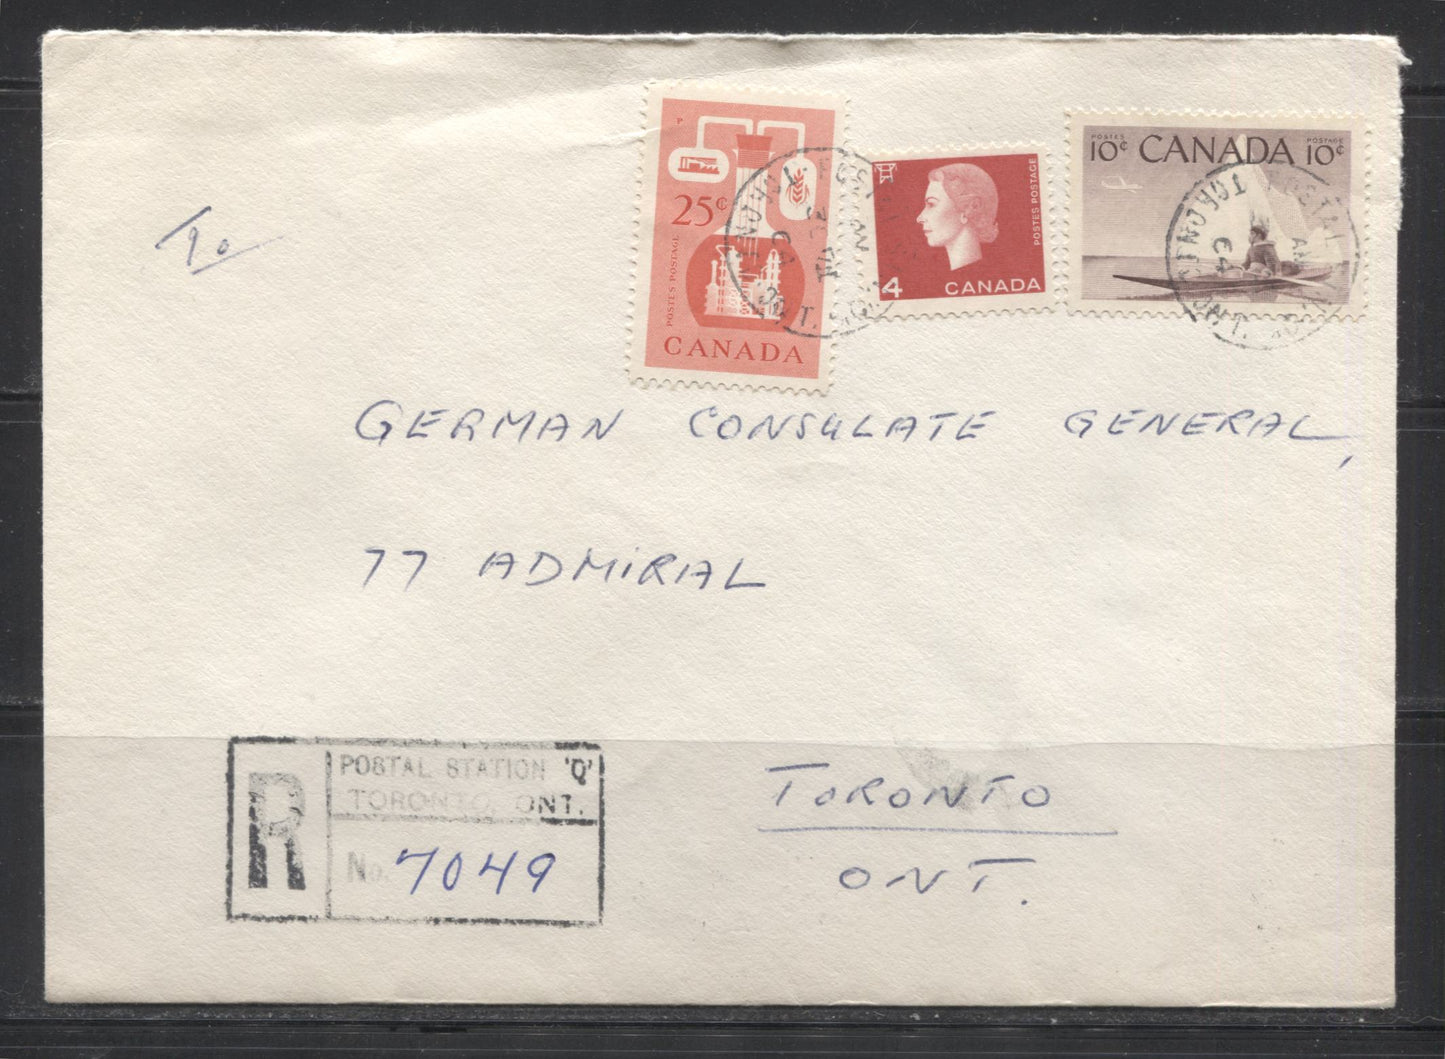 Canada #351/404 10c Purple Brown - 4c Red Queen Elizabeth, Inuk & Chemical Industry, 1955-1967 Wilding Issue & 1962-67 Cameo Issue,  July 1964 39c Local Registered Cover Sent Within Toronto